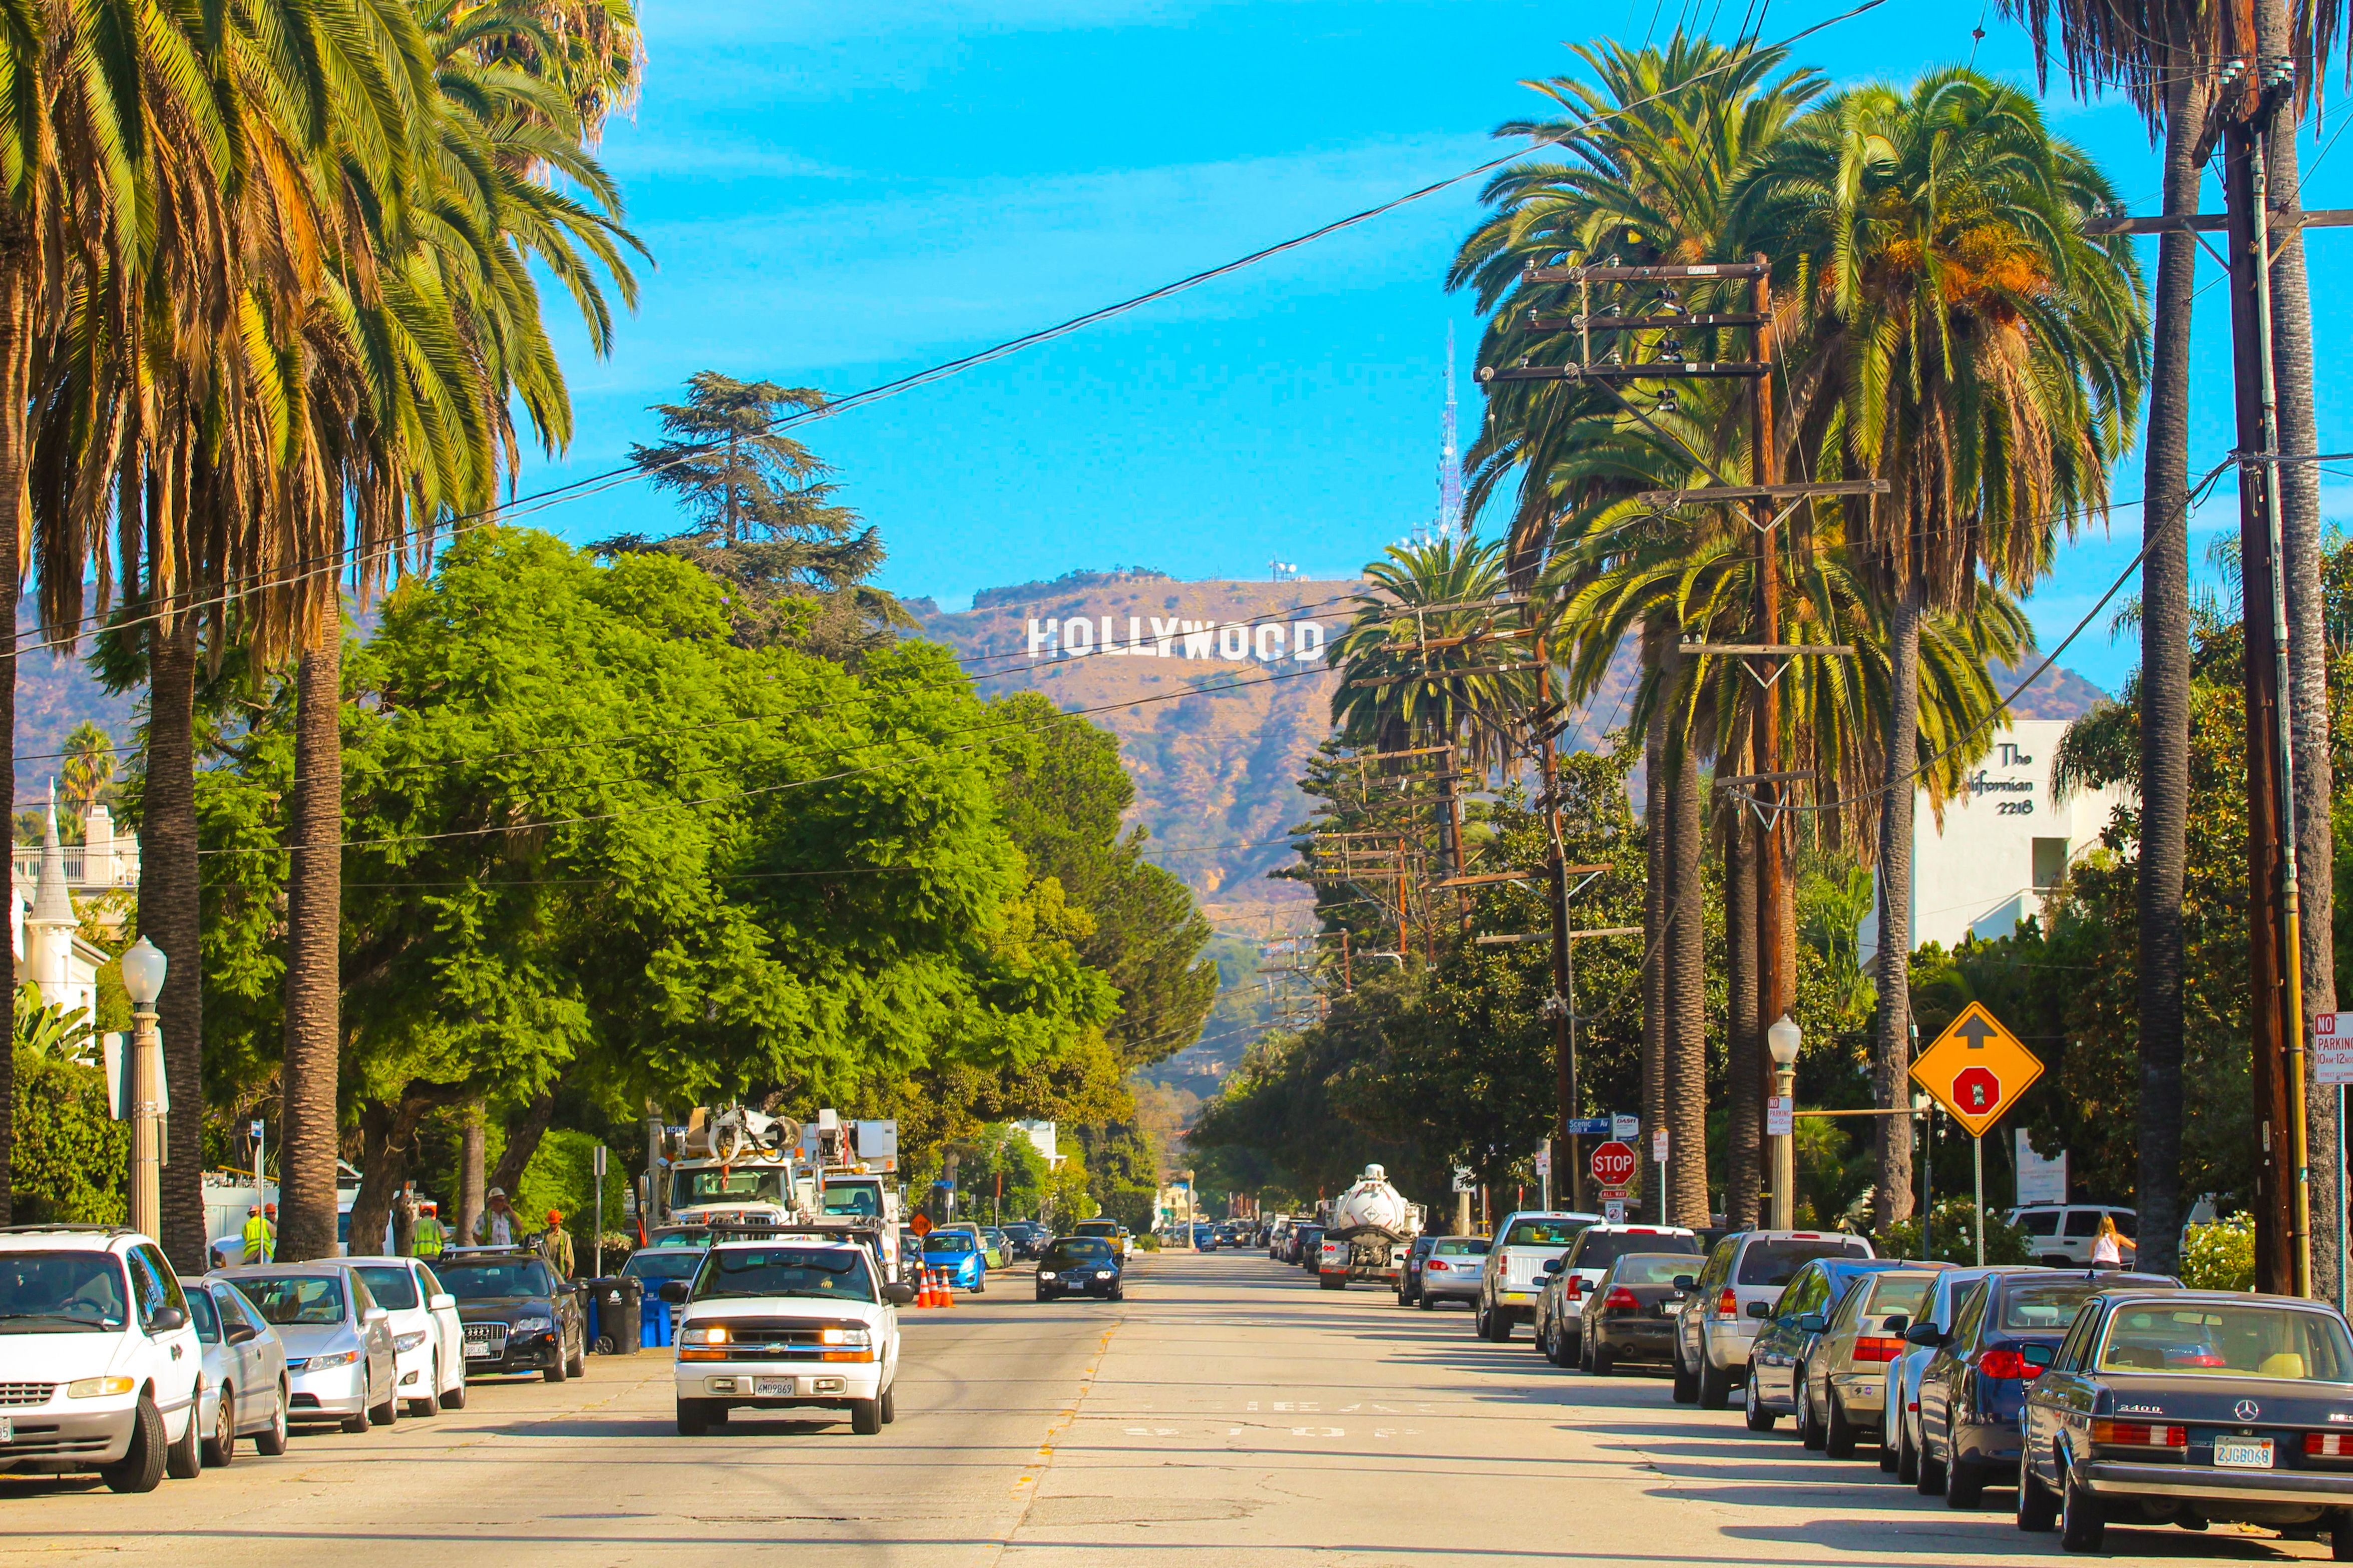 Cars driving along a palm tree-lined road with the Hollywood Sign in the distant background